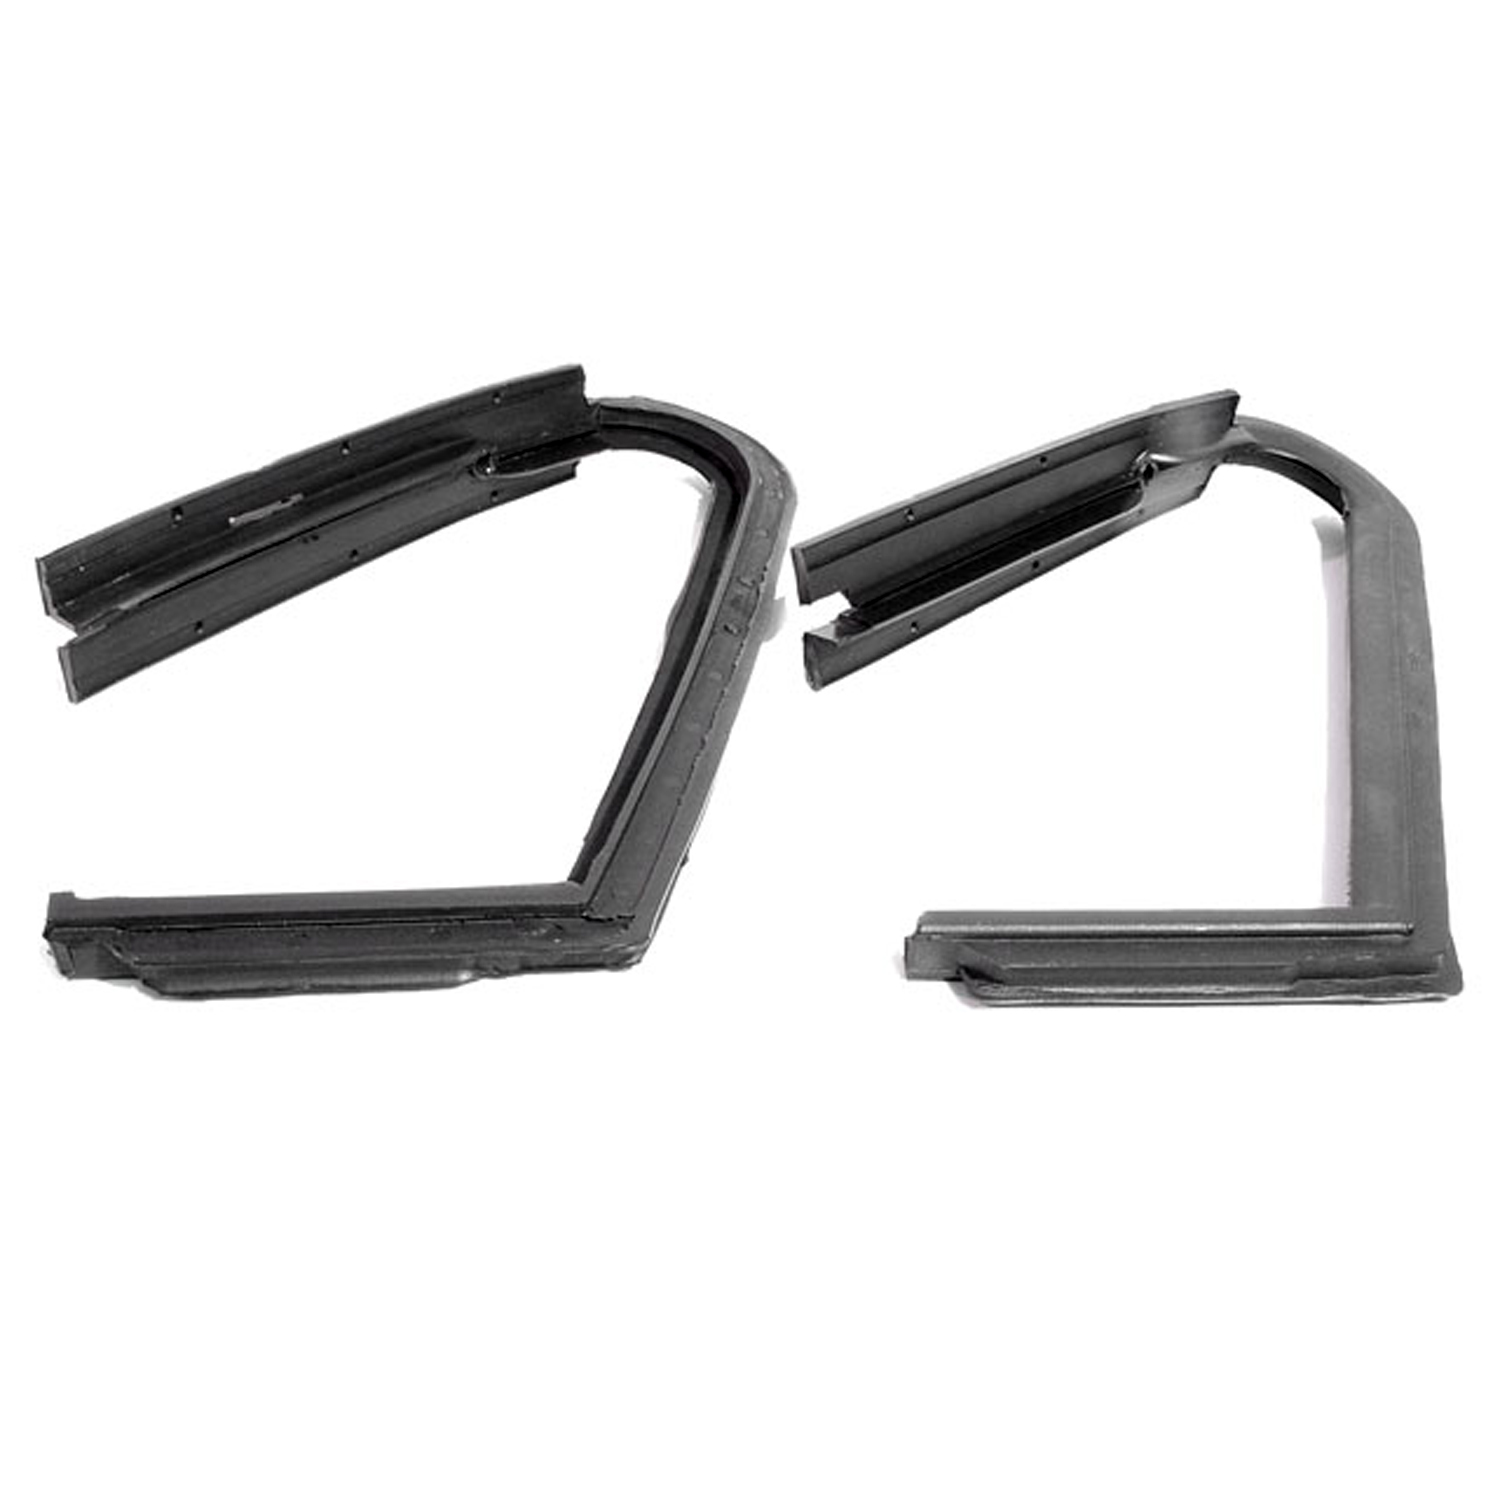 1959 Volkswagen Karmann Ghia Front Vent Window Seals, for Convertibles-WR 9800